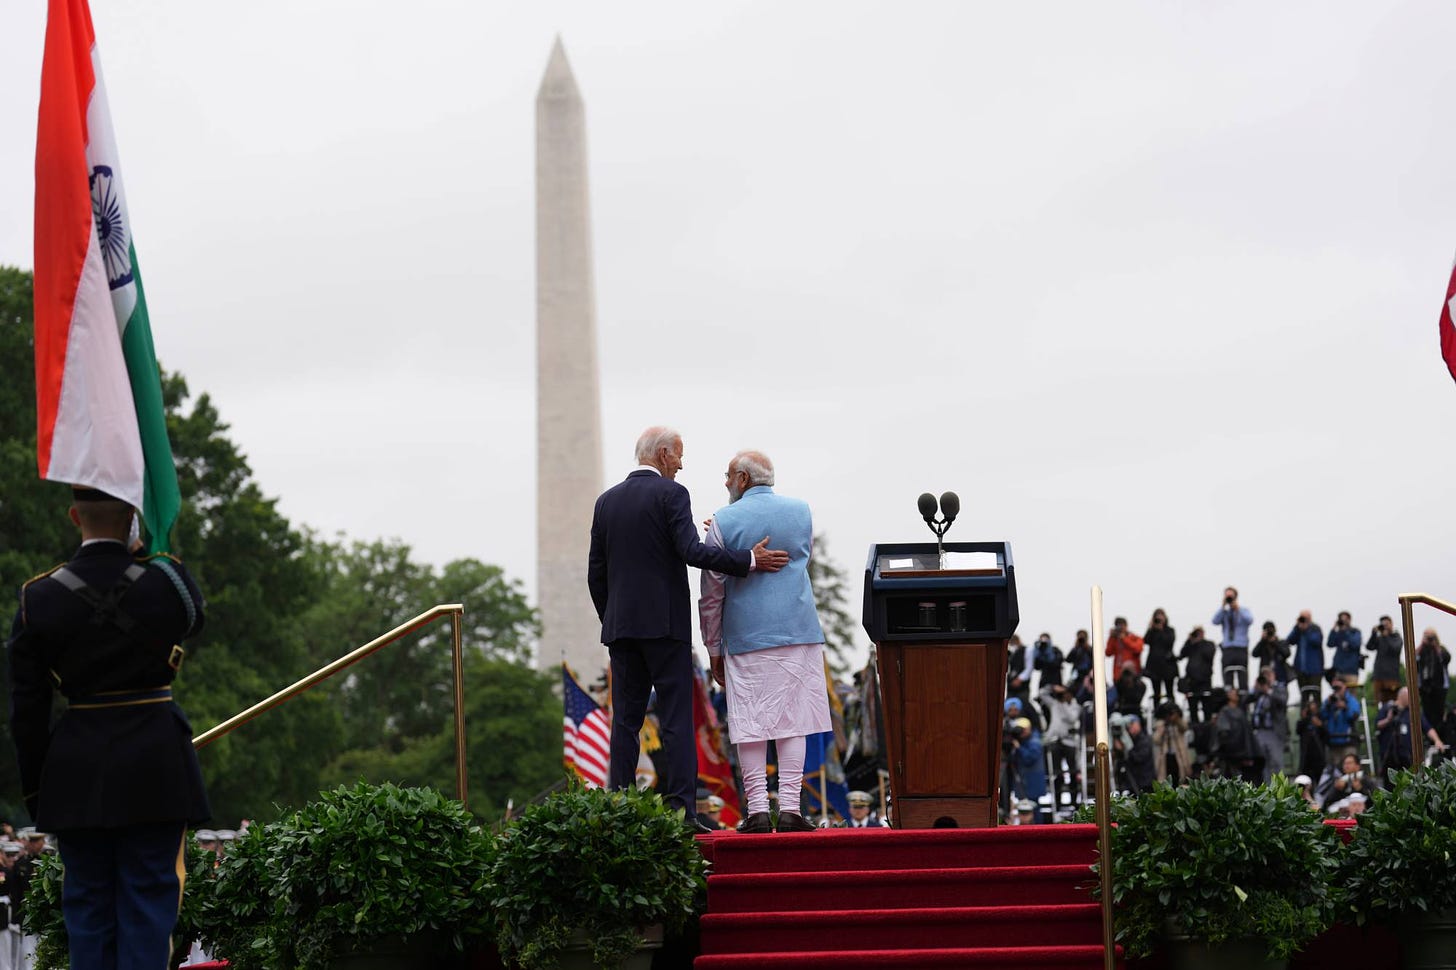 U.S. President Joe Biden with Indian Prime Minister Narendra Modi on the South Lawn of the White House in Washington on June 22. | SAMUEL CORUM / THE NEW YORK TIMES